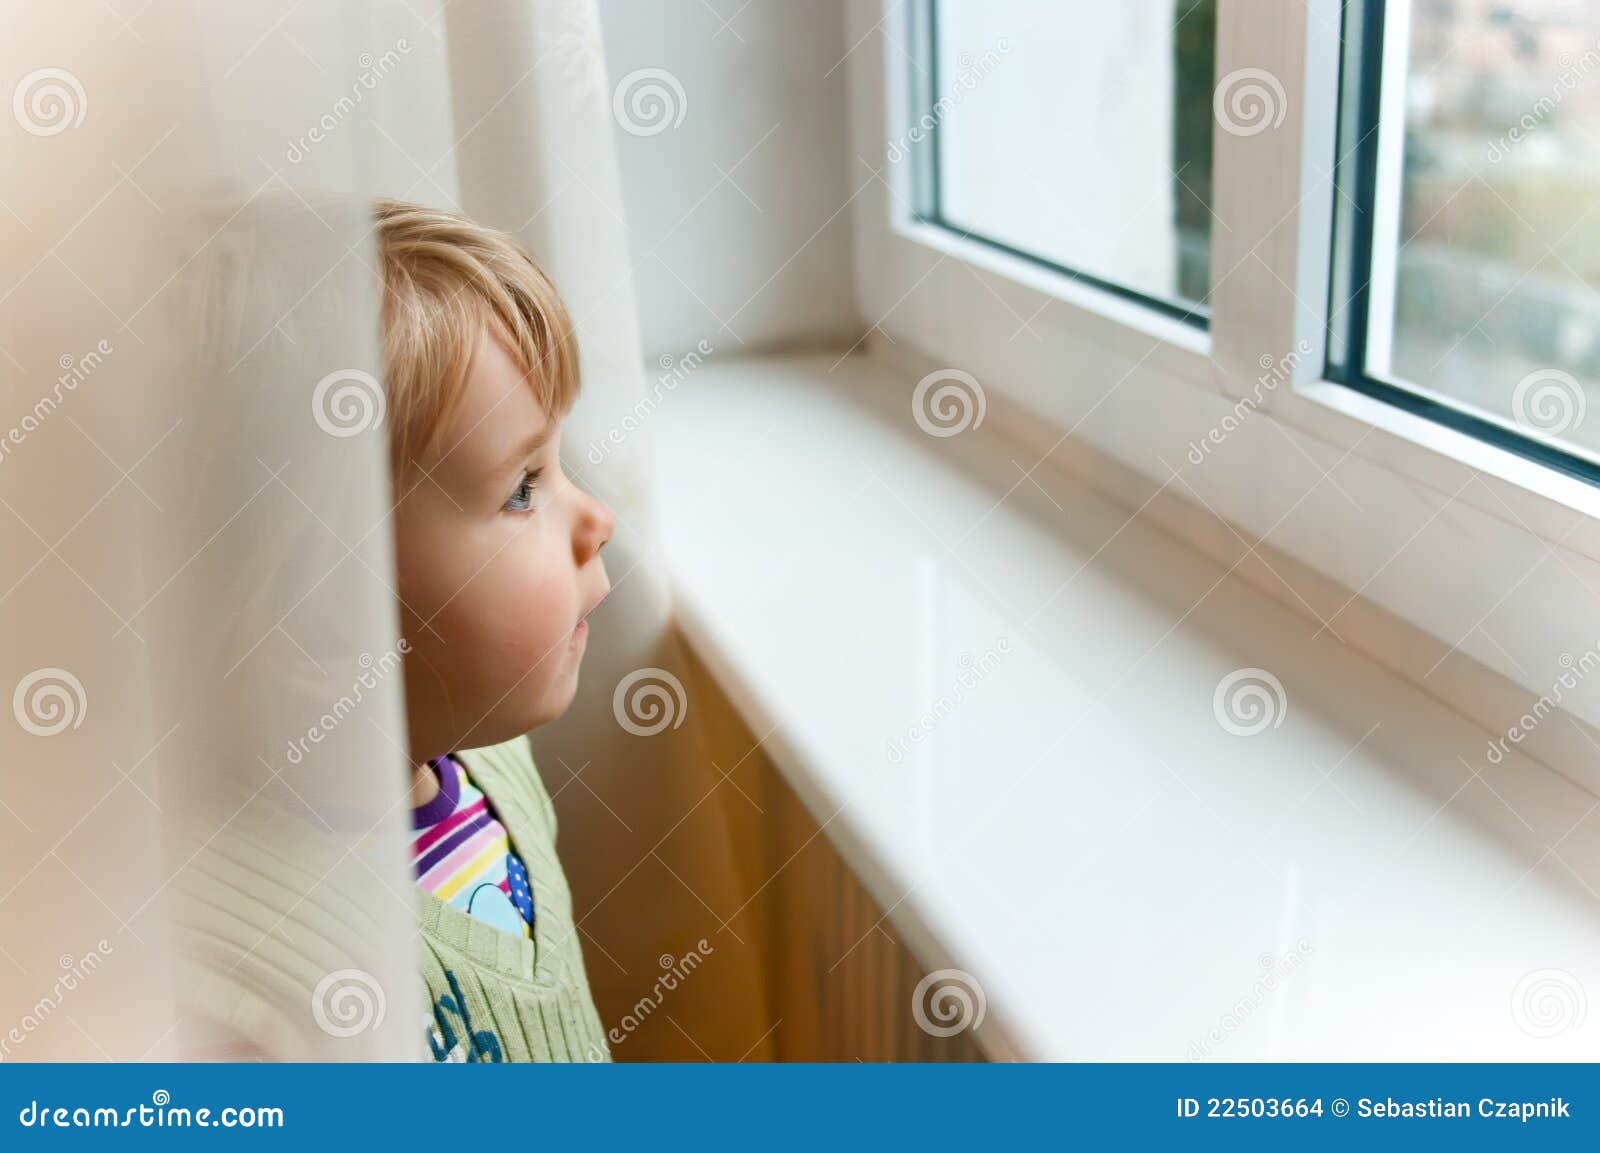 baby girl at window